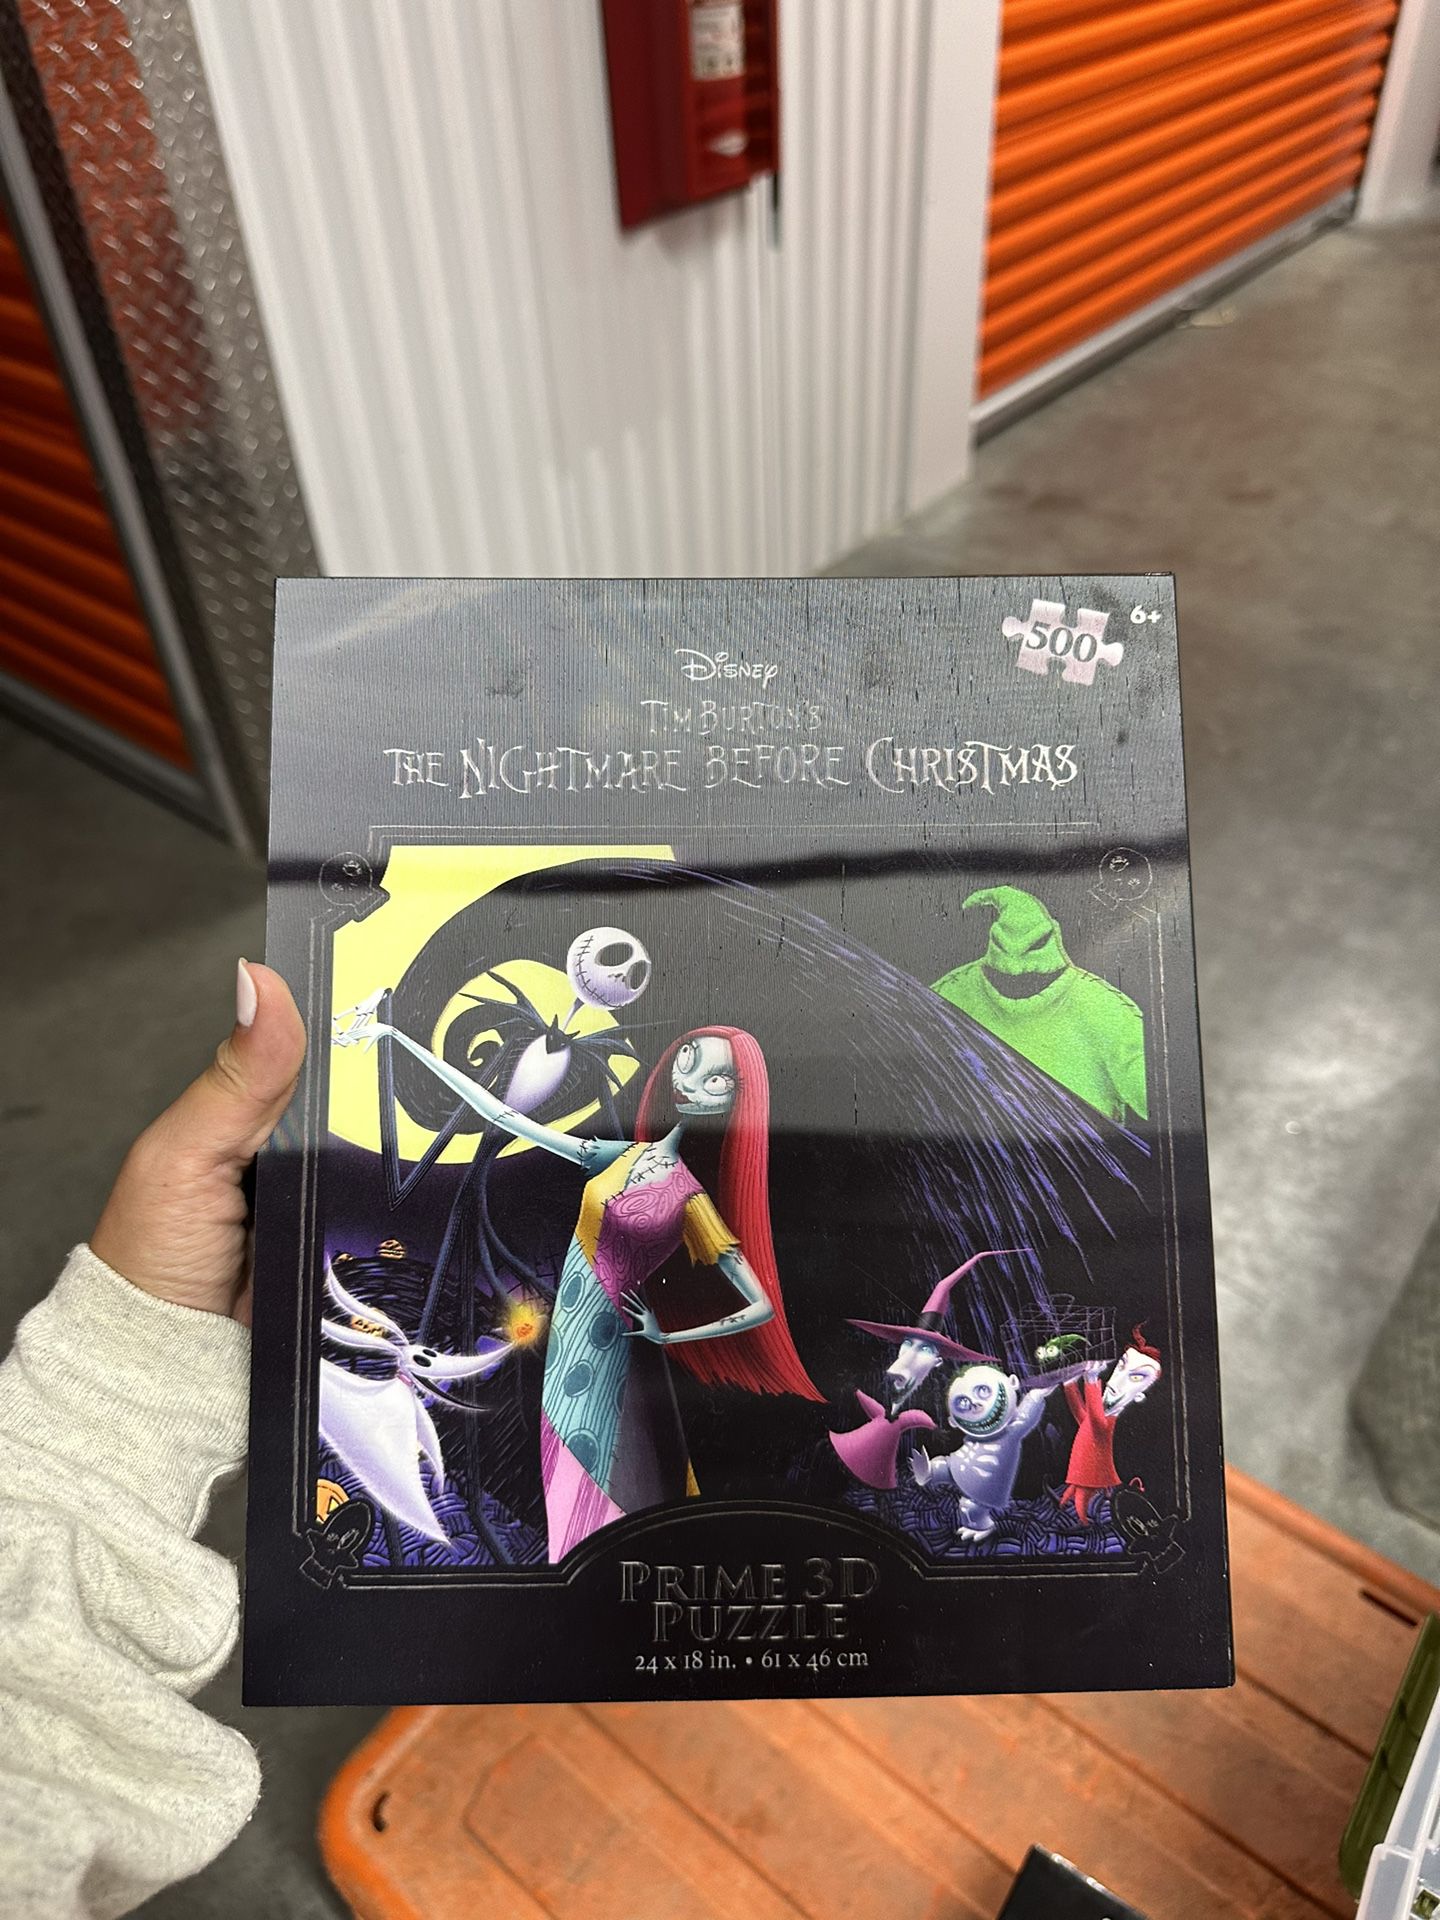 The Nightmare Before Christmas Puzzle